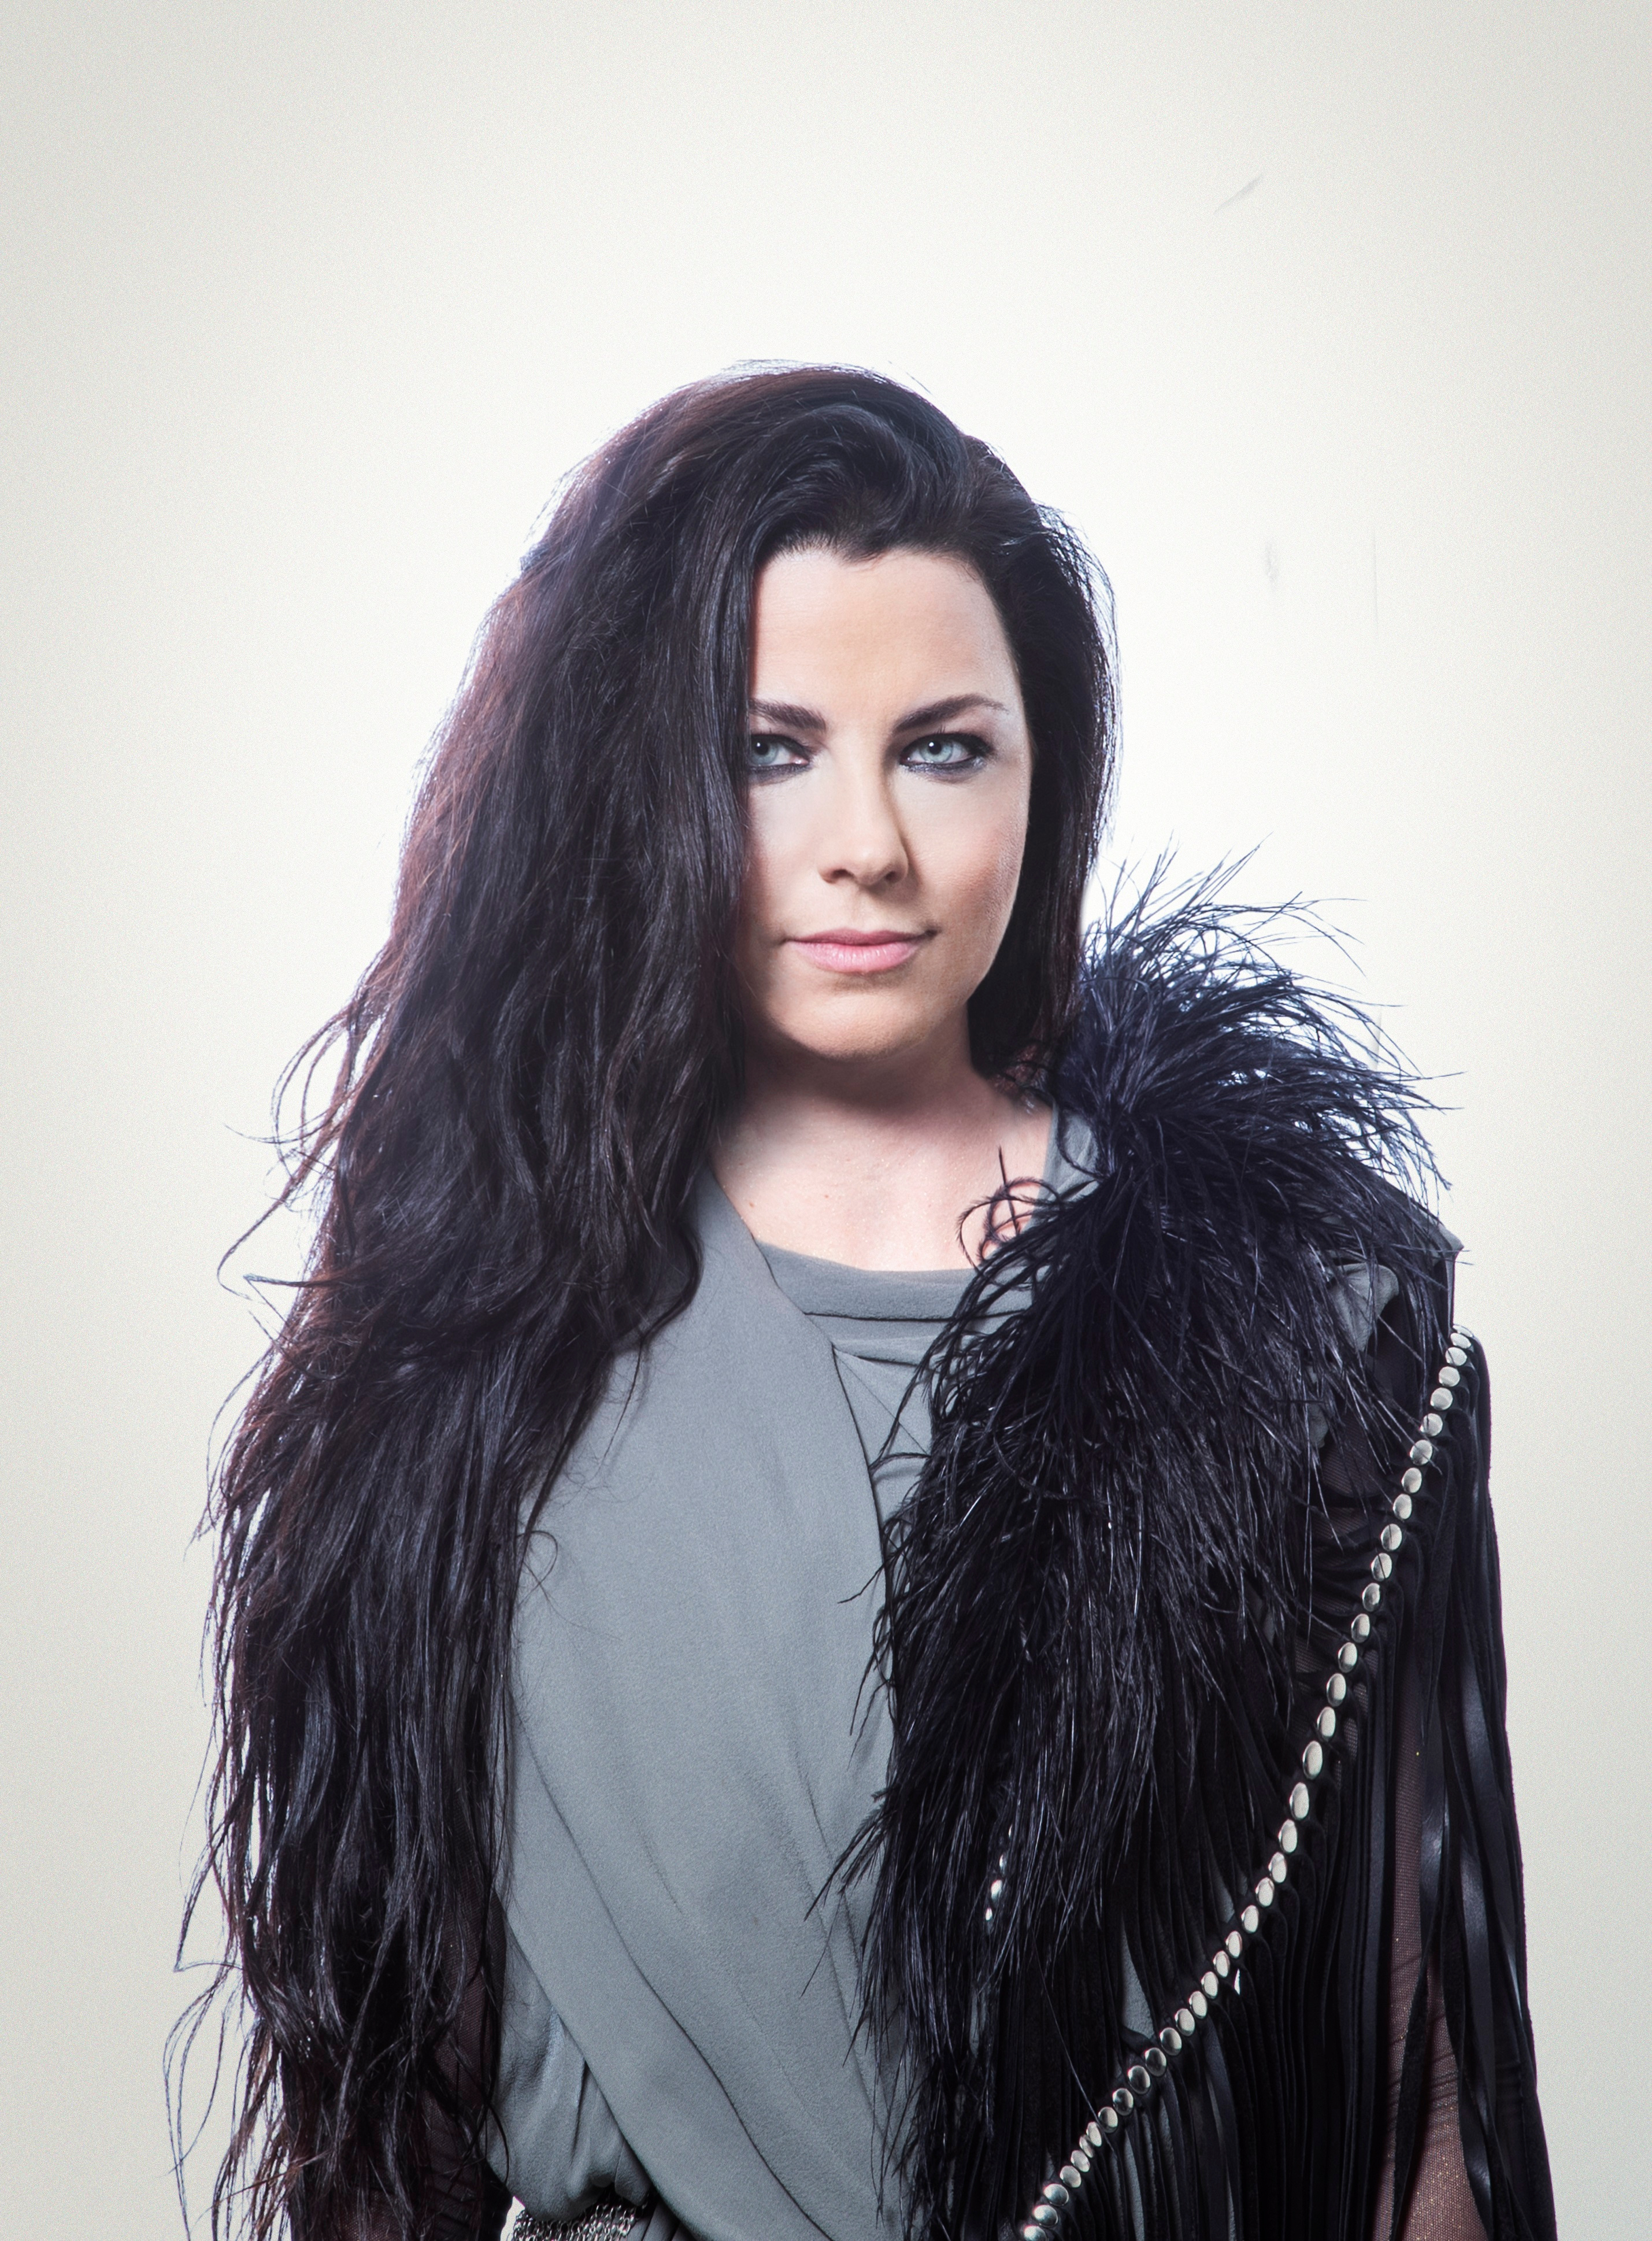 2858x3876
Keywords: amy lee;synthesis;photoshoot;hq